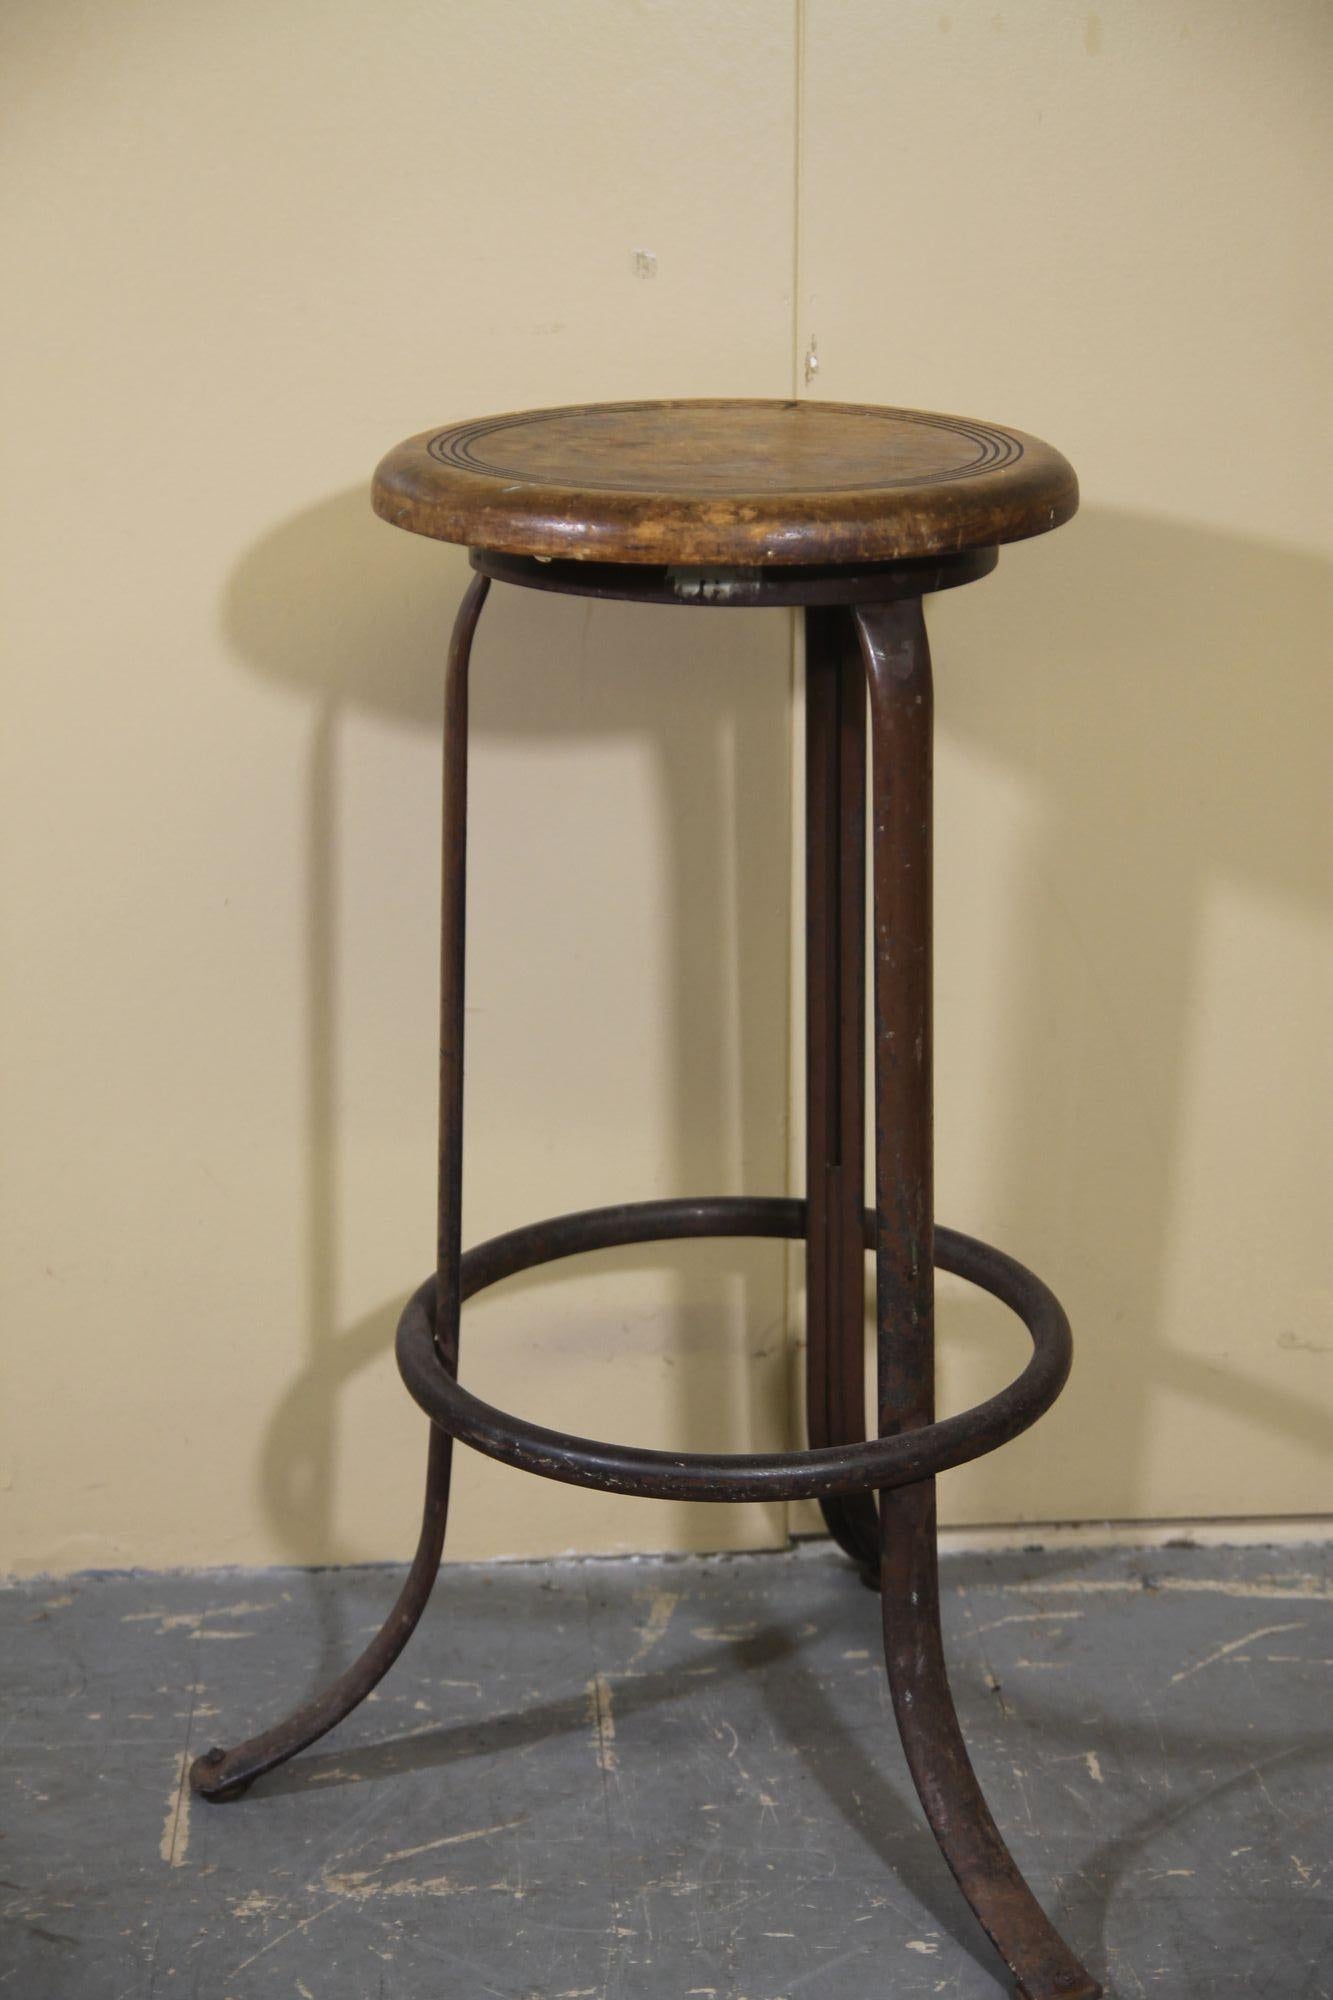 Pleased to offer this great industrial stool with wood seat and metal base. The metal base has a dark burgundy finish. The base also has the foot rest ring on it.